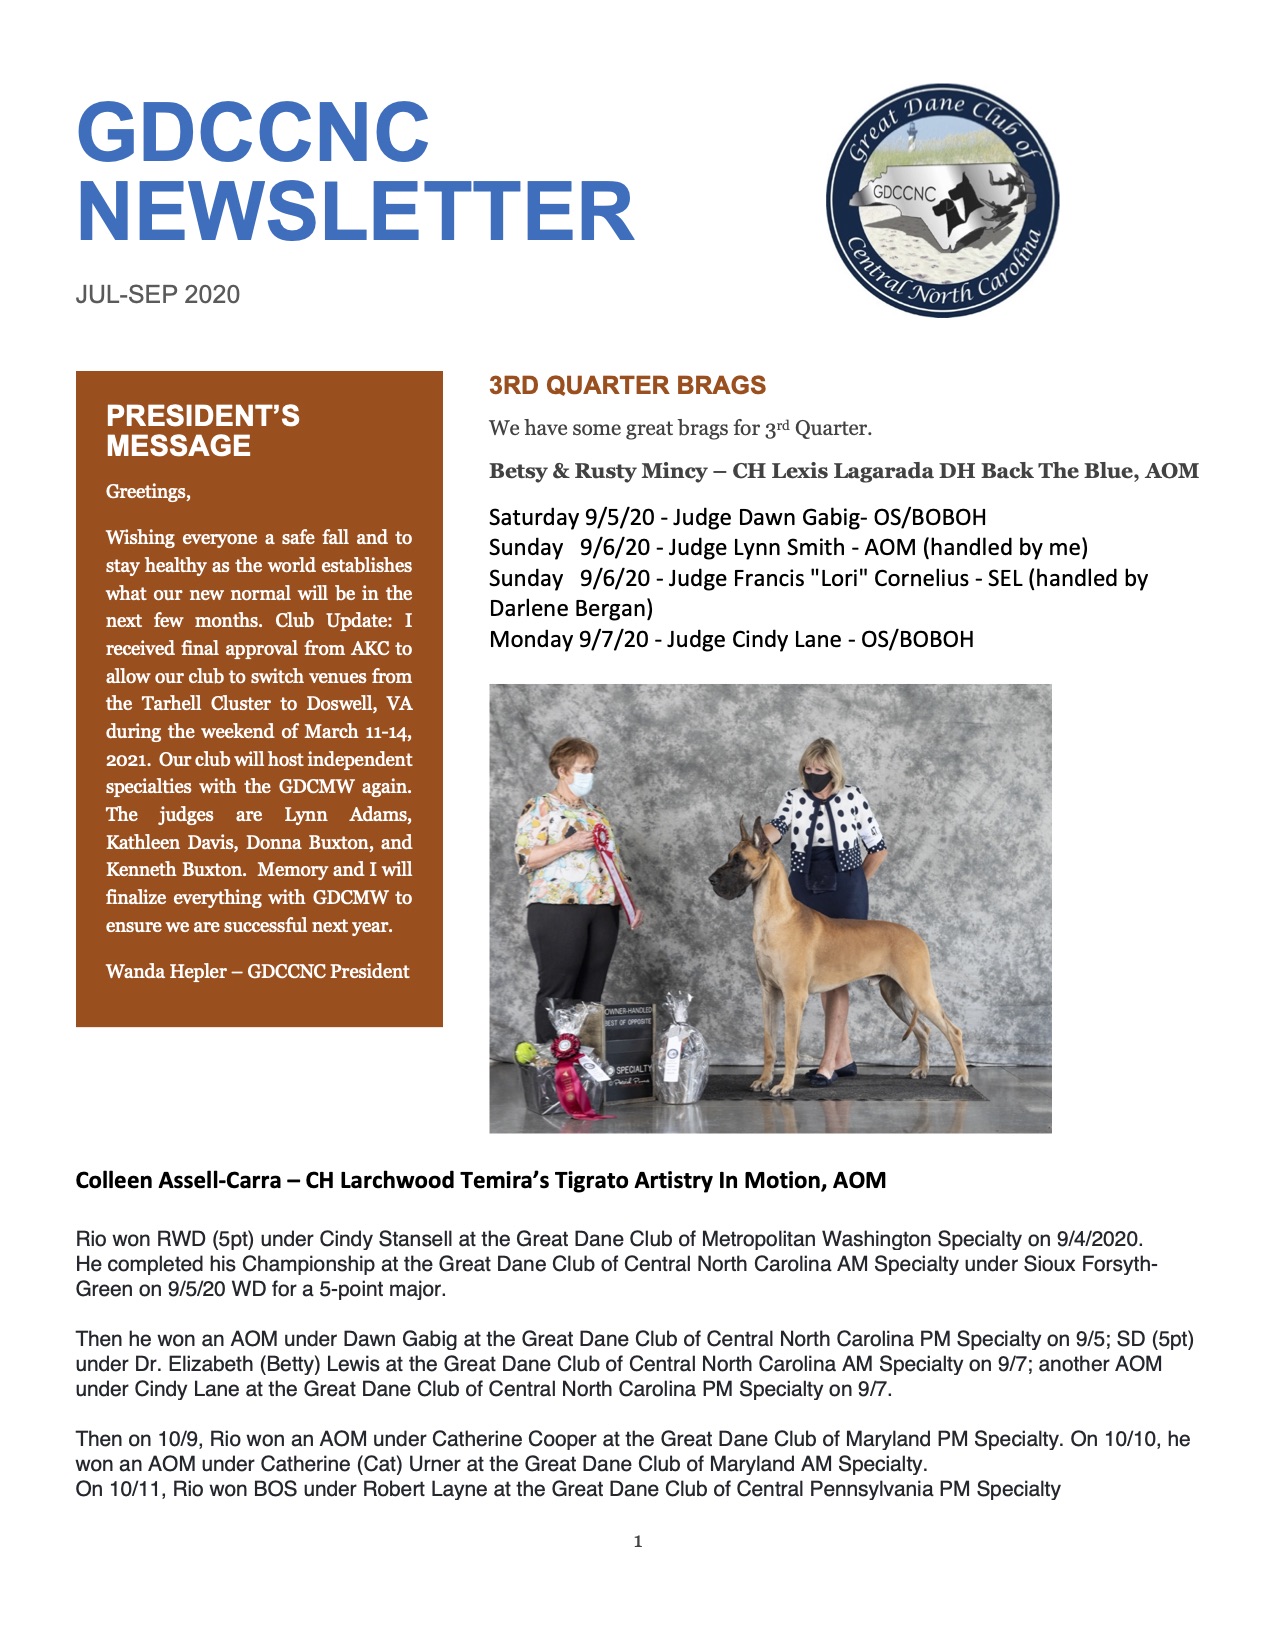 See newsletter here.